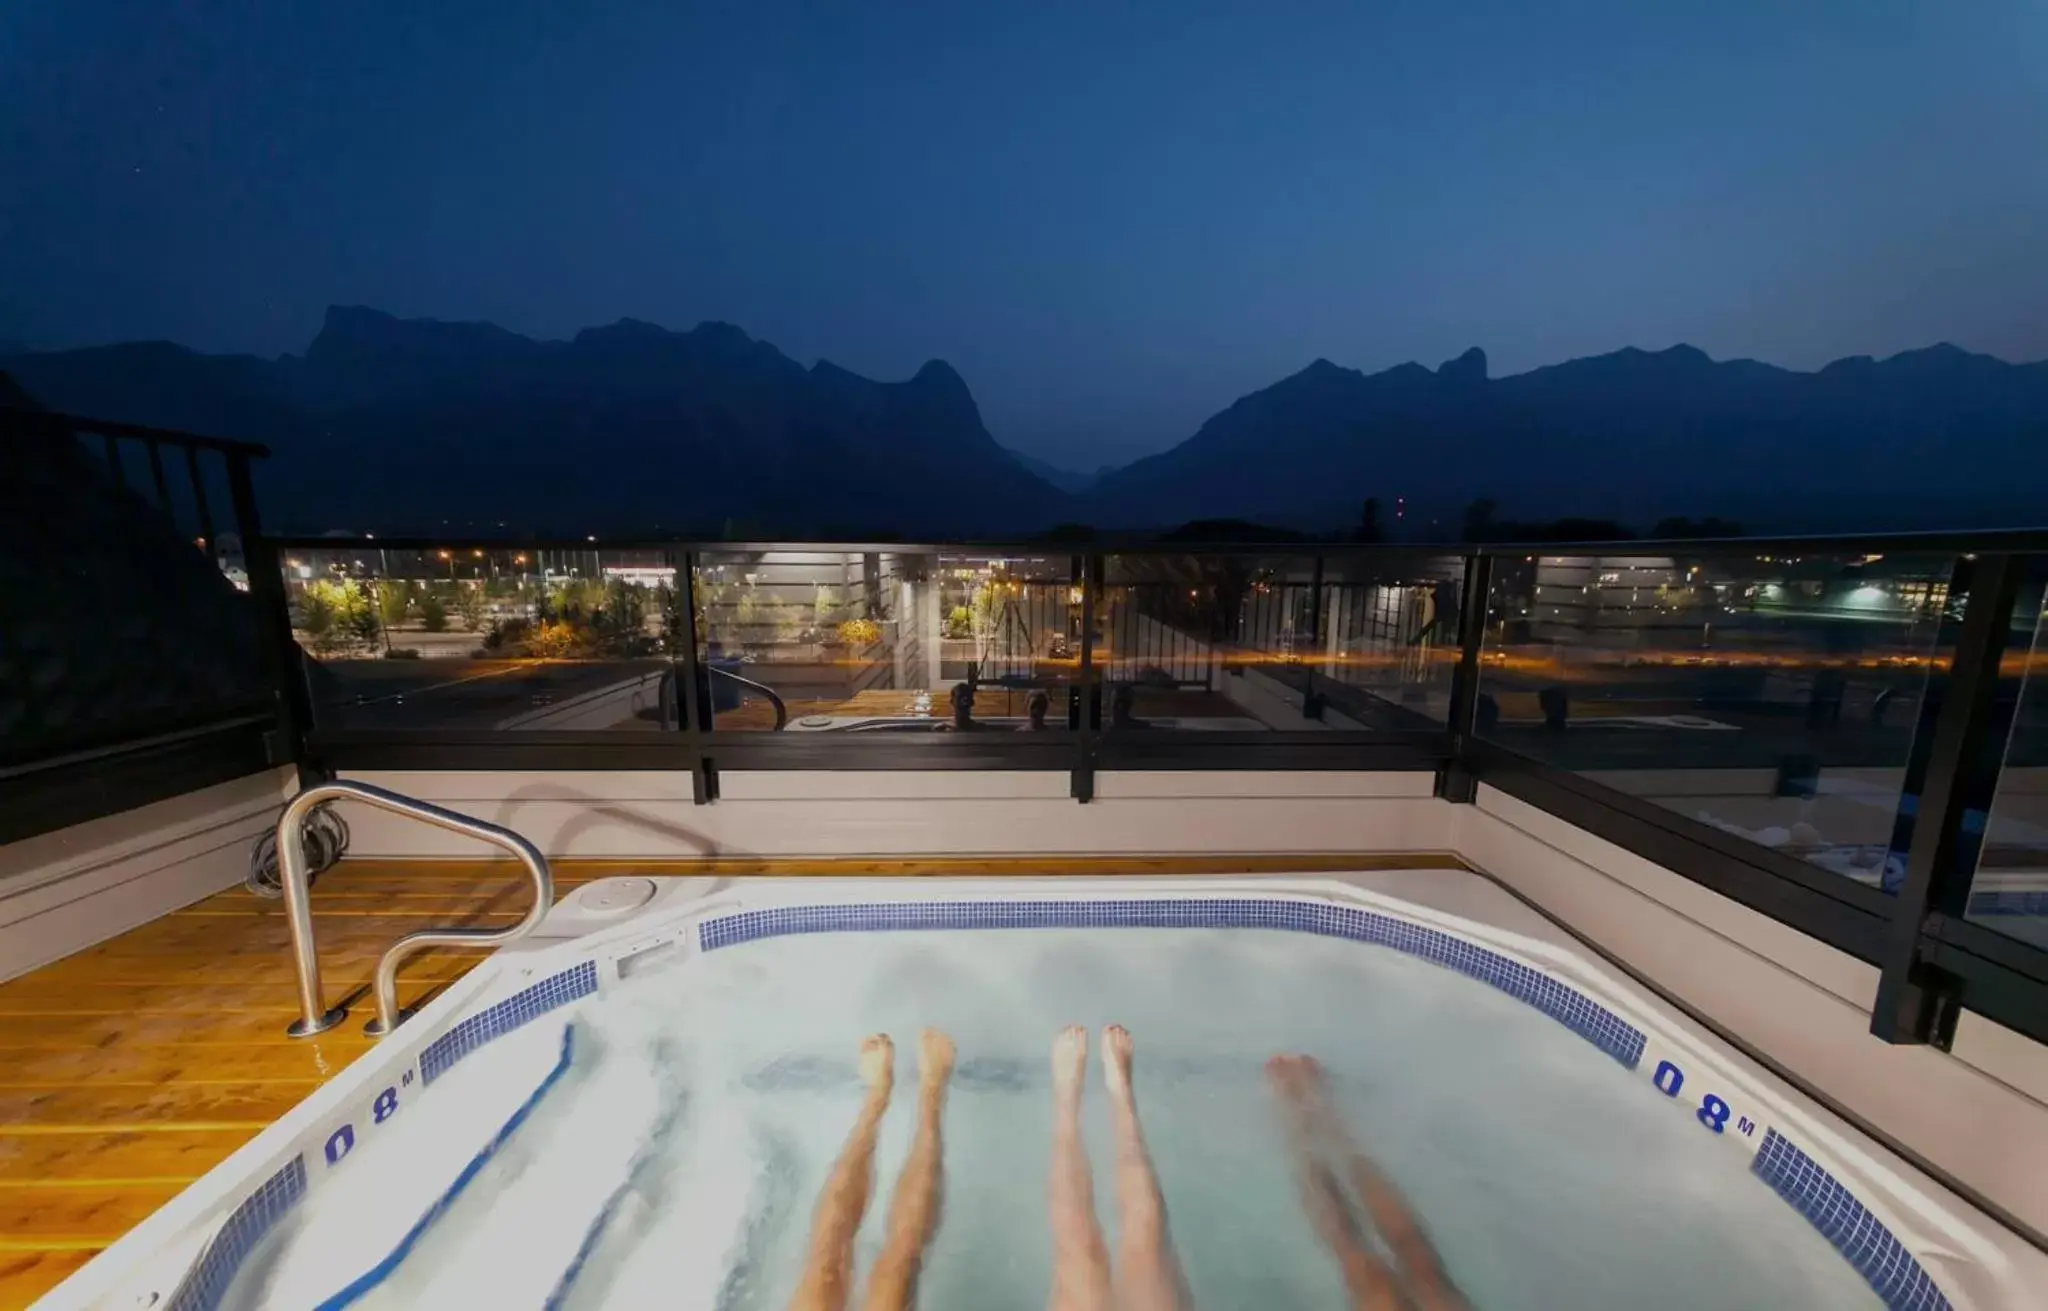 Area and facilities in Basecamp Resorts Canmore